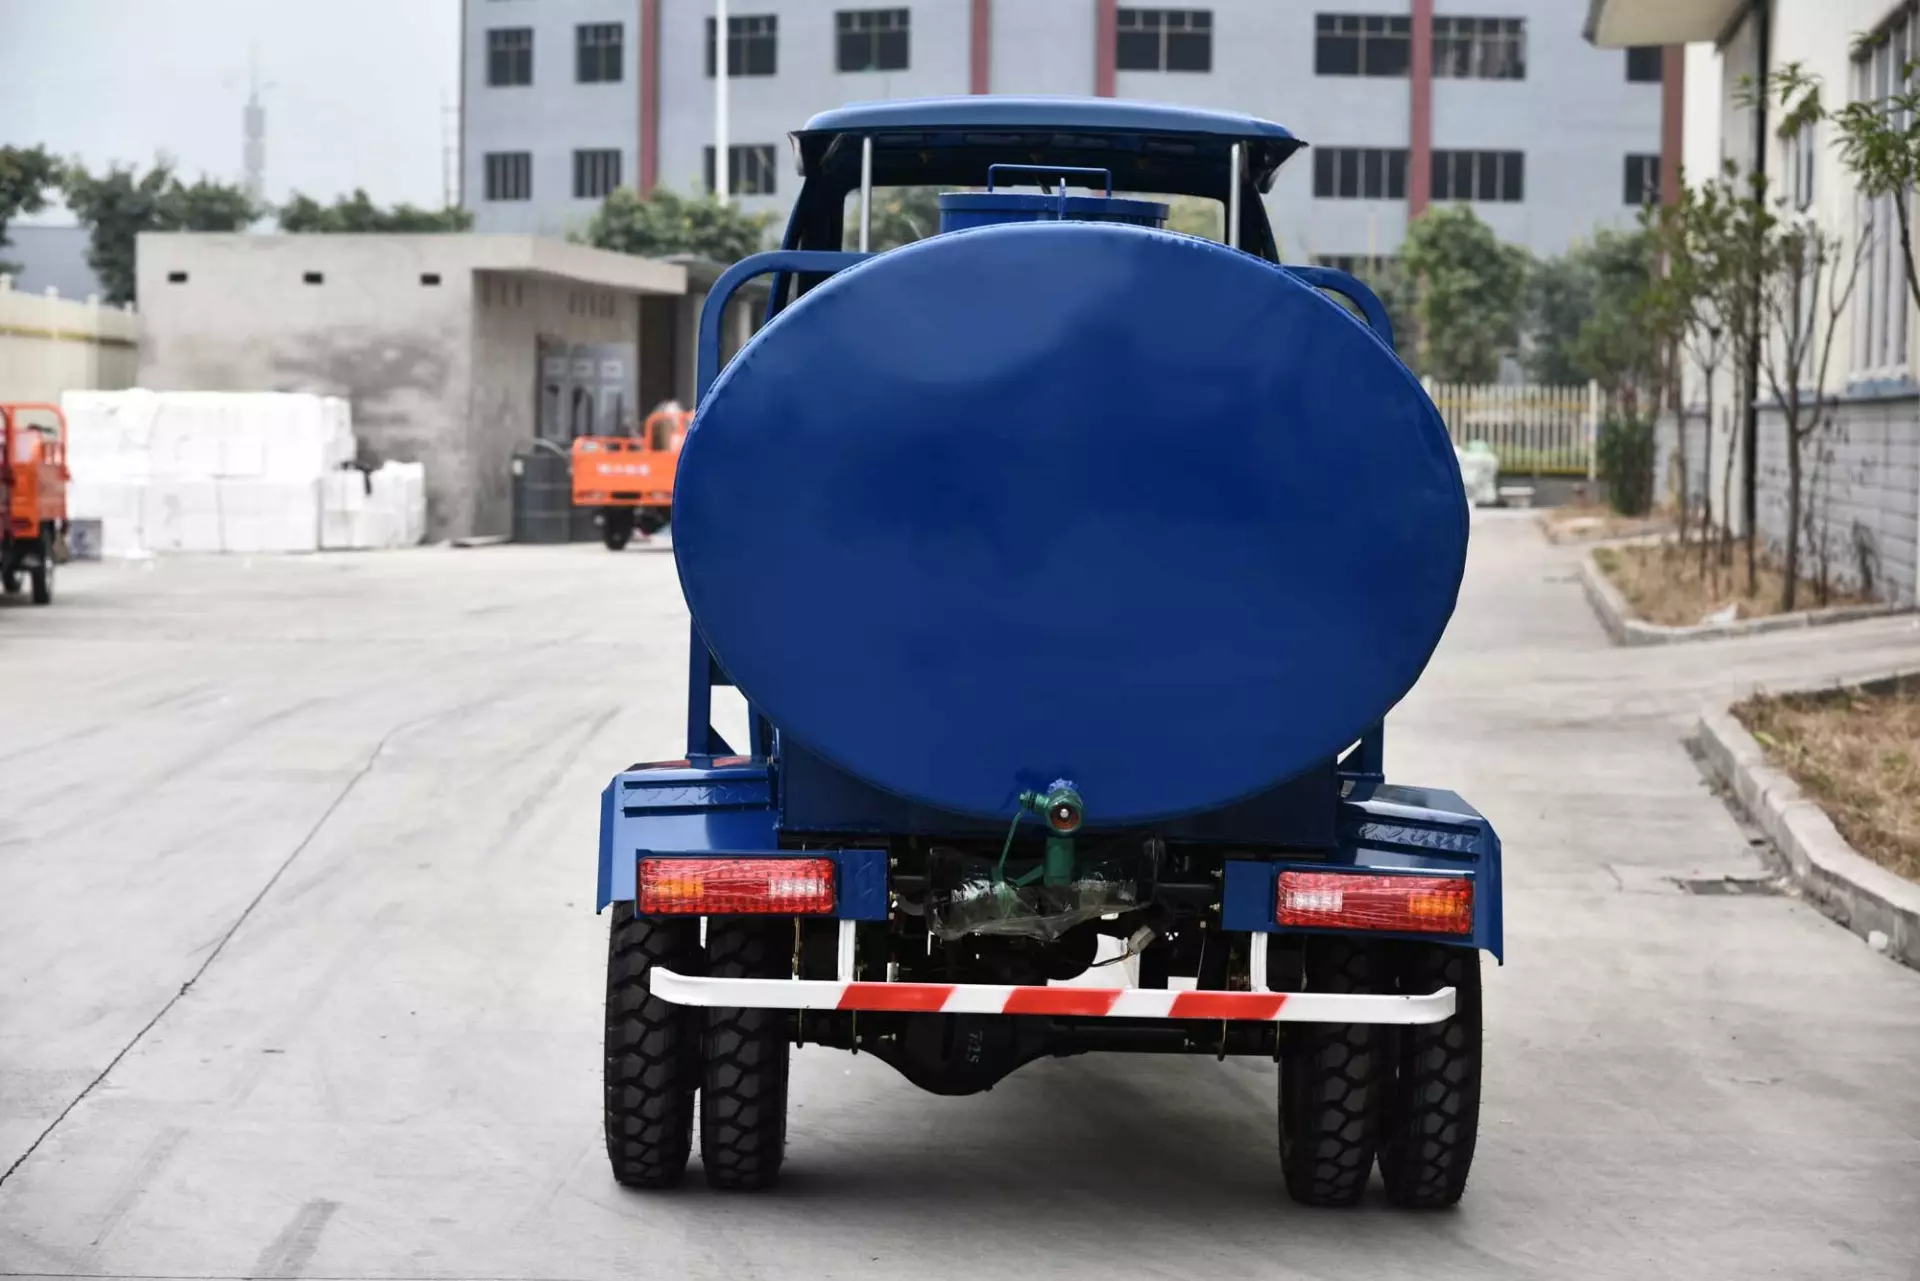 2021 DW-3 High Quality 200 250CC Motorized Special Cabin Water Tank 1600L Tricycles Manufacture Cargo water tanker motorcycle